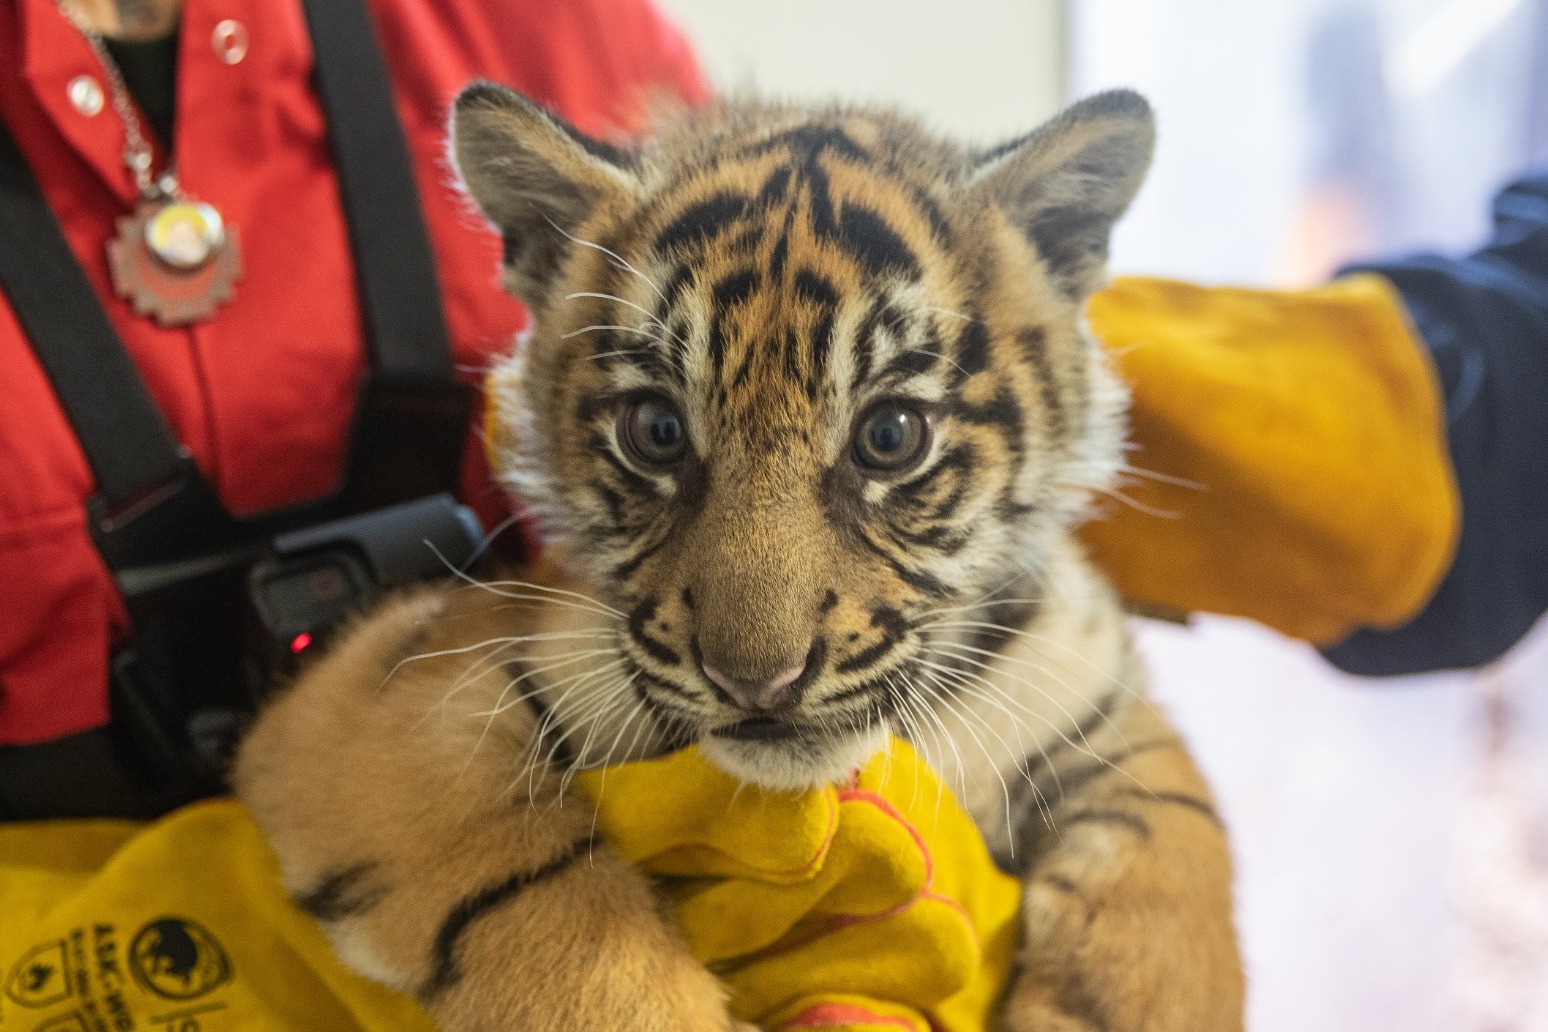 London Zoo staff get ‘mega workout’ holding tiger cub triplets for health check 